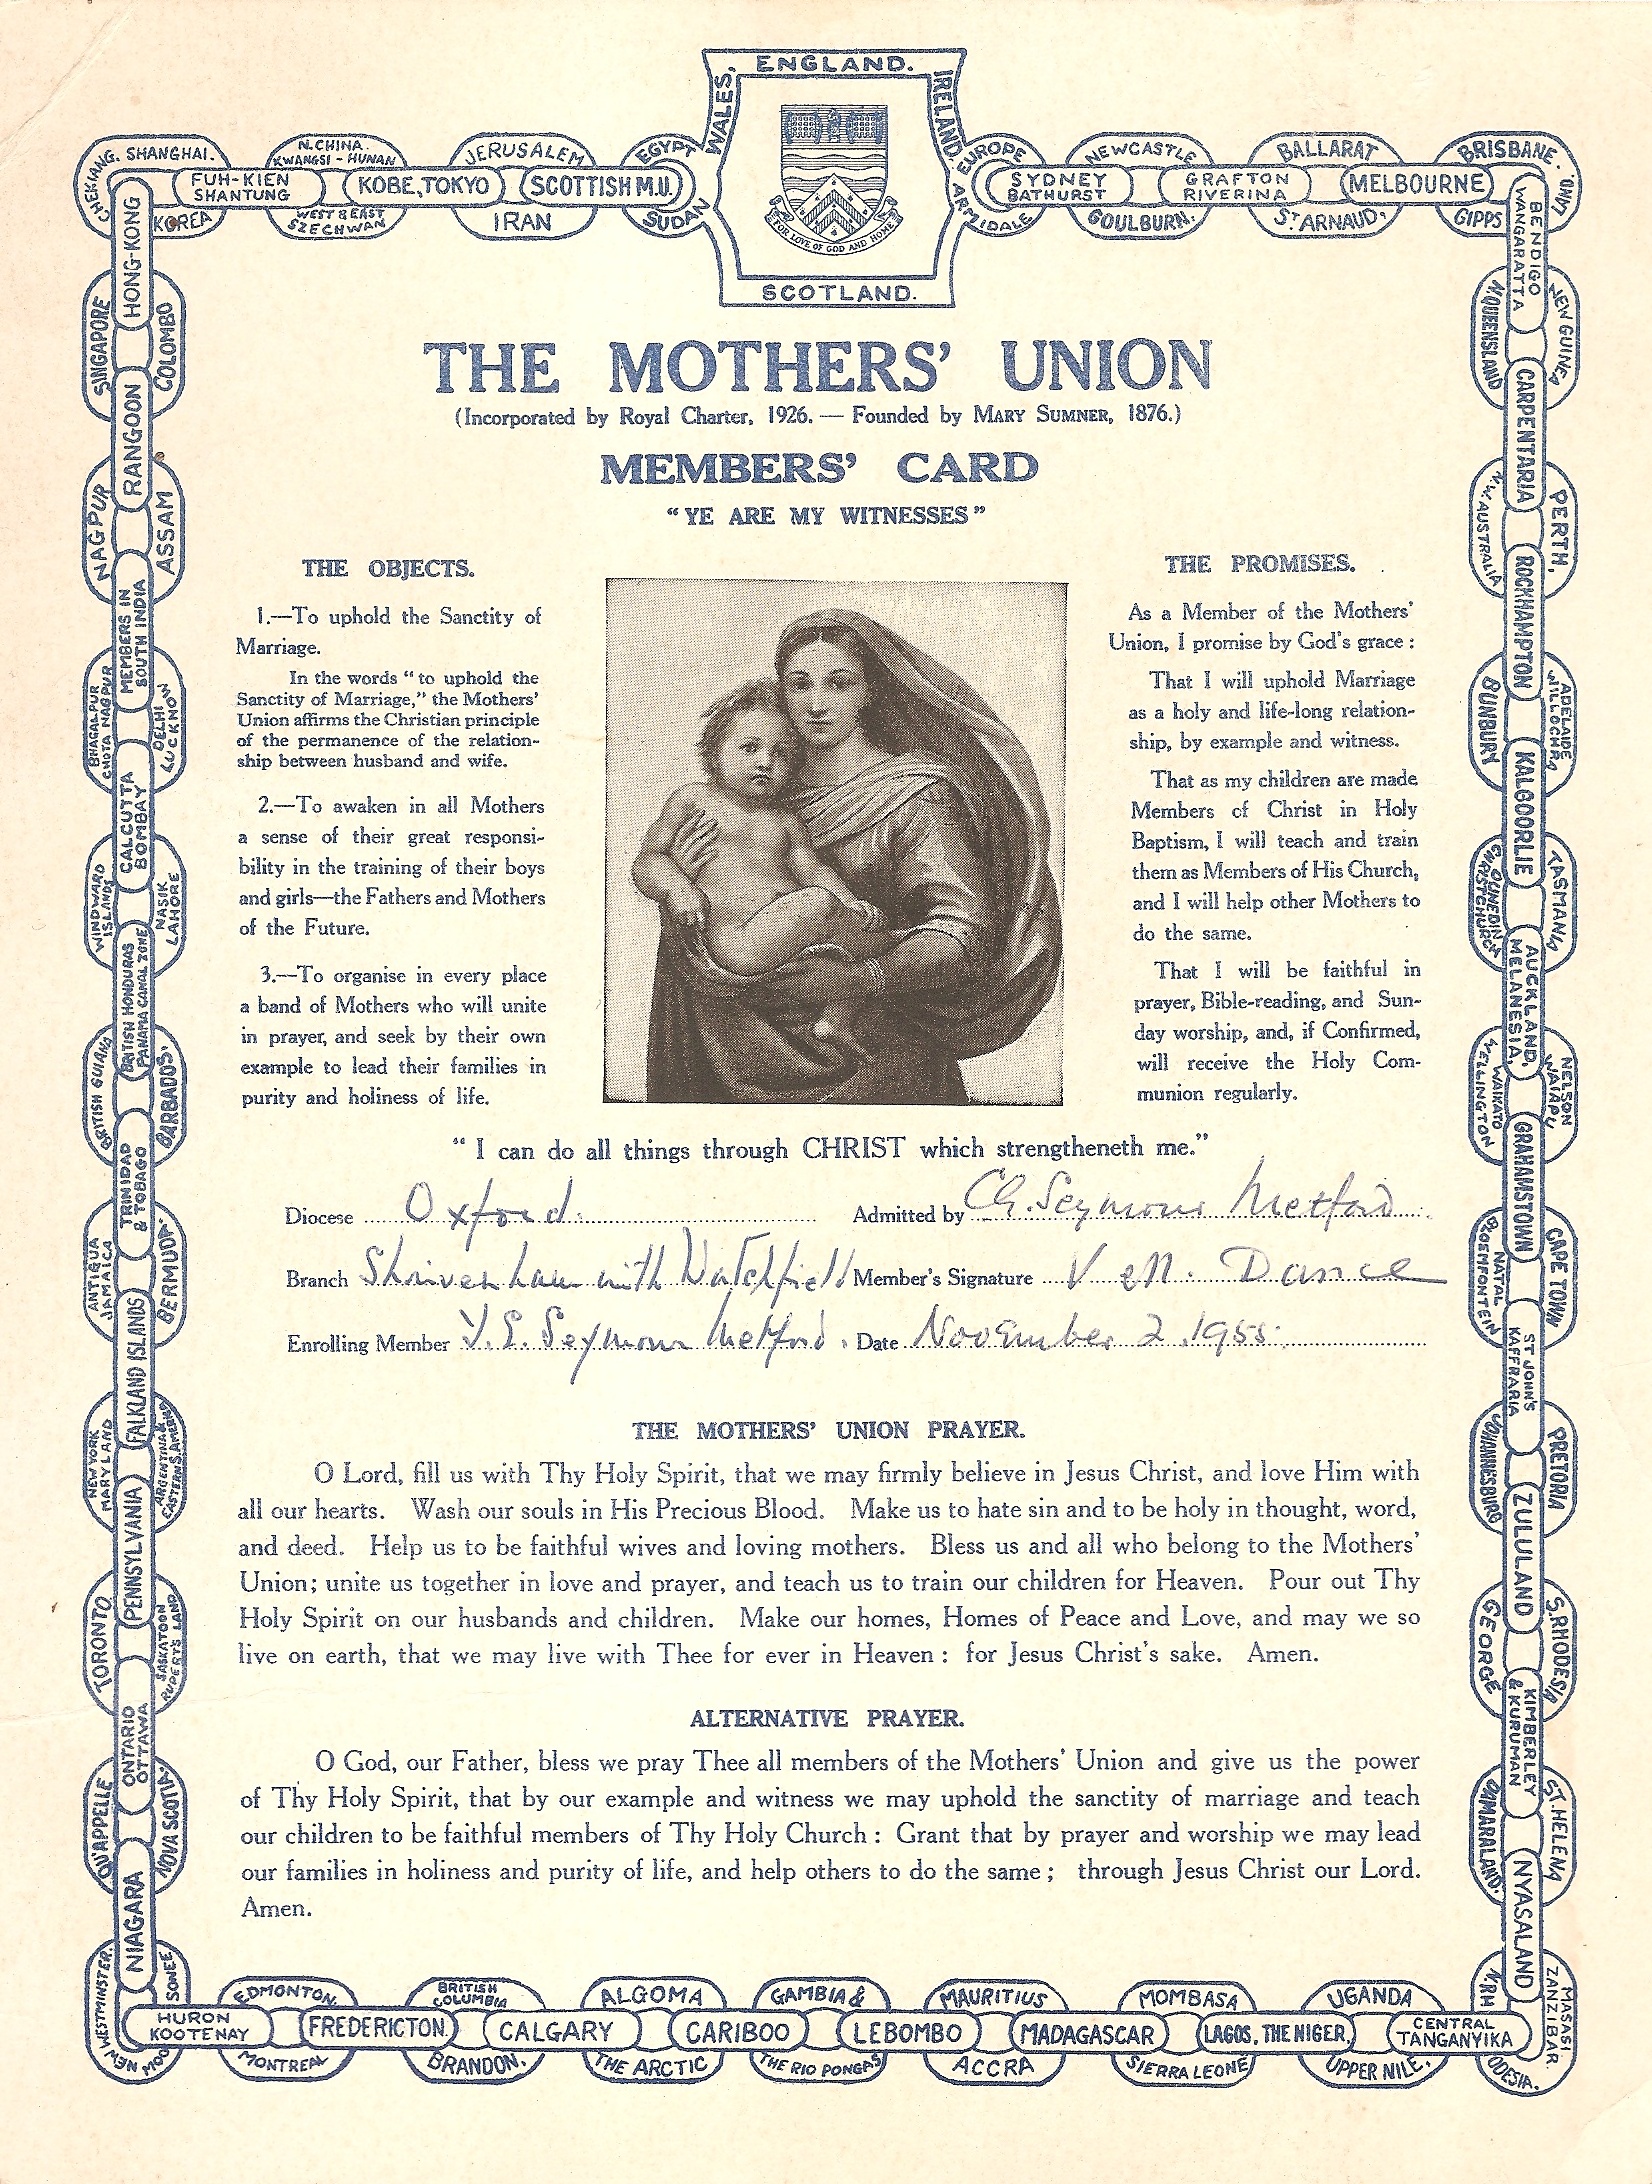 Mothers' Union members' card